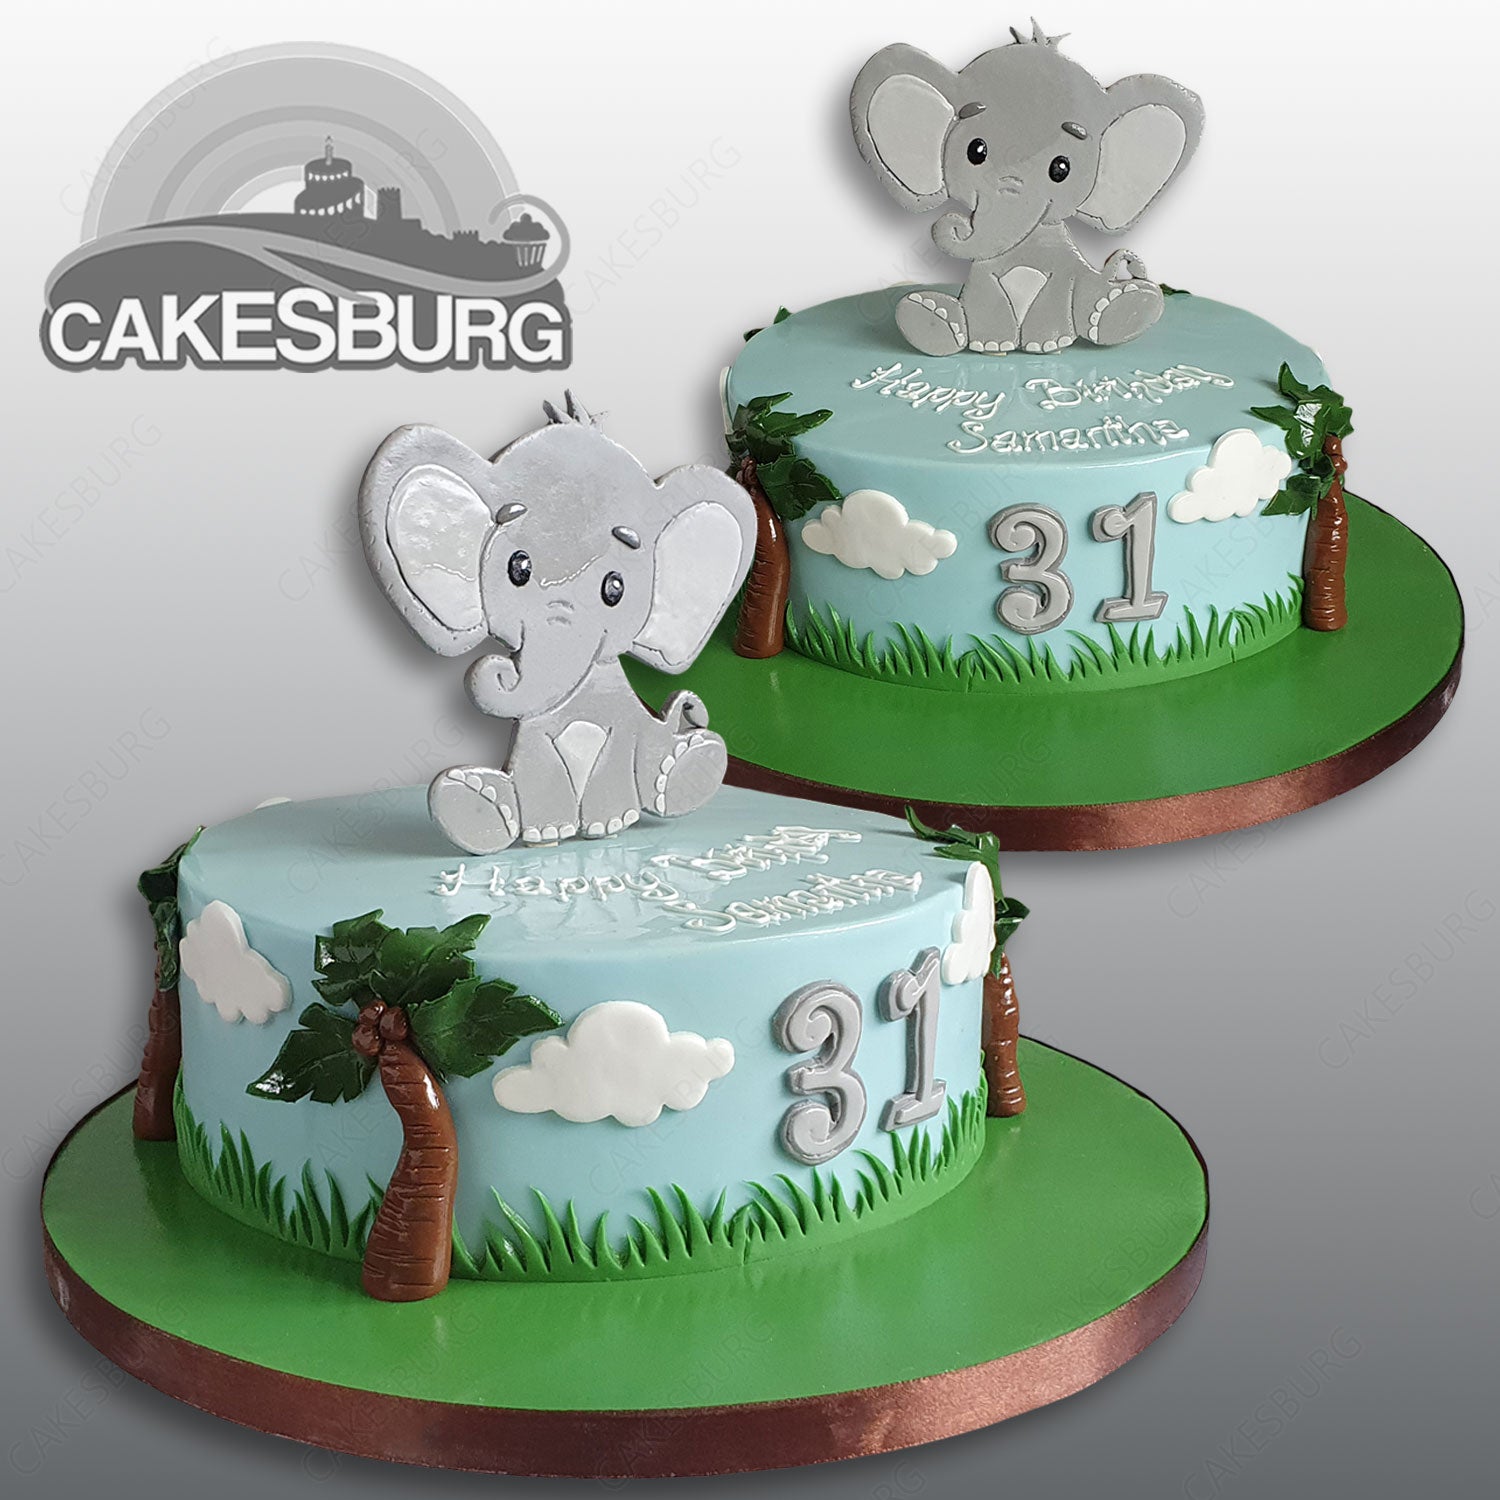 Elephant edible cake topper muffin party decoration birthday gift baby pink  | eBay